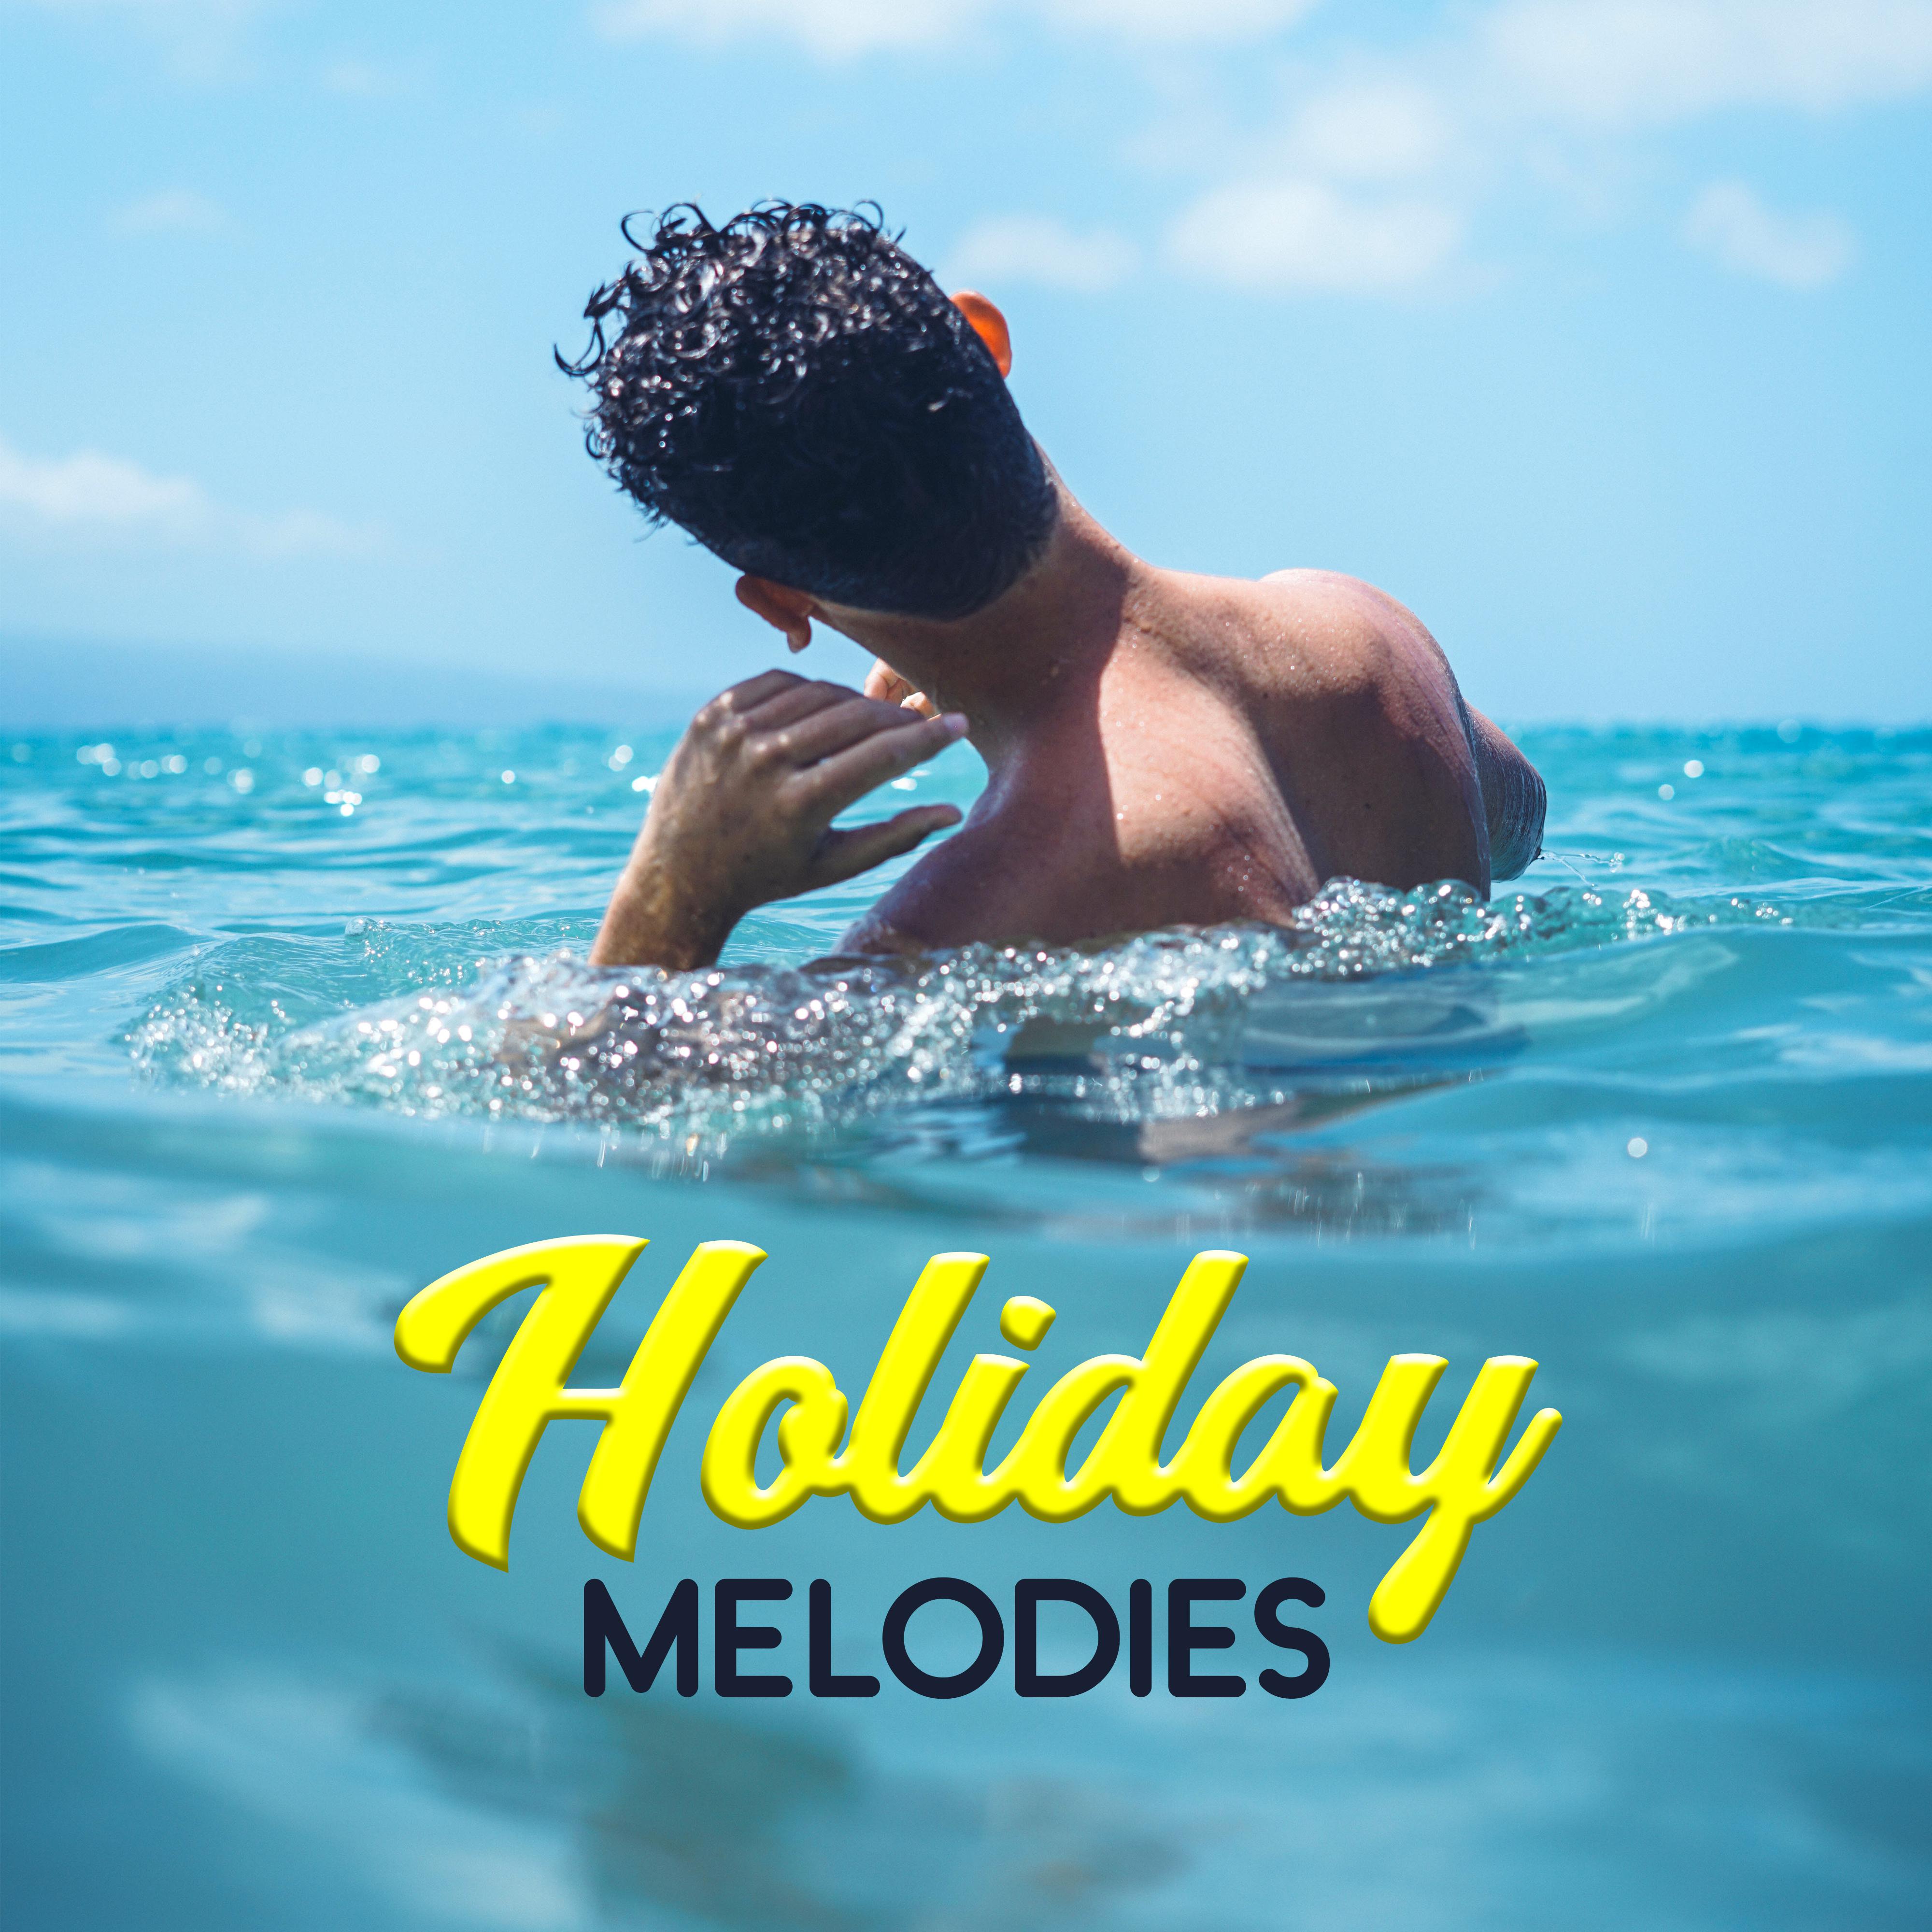 Holiday Melodies – Deep Vibes Only, Beach Party, Holiday Chill, Good Mood, Energy for Mind